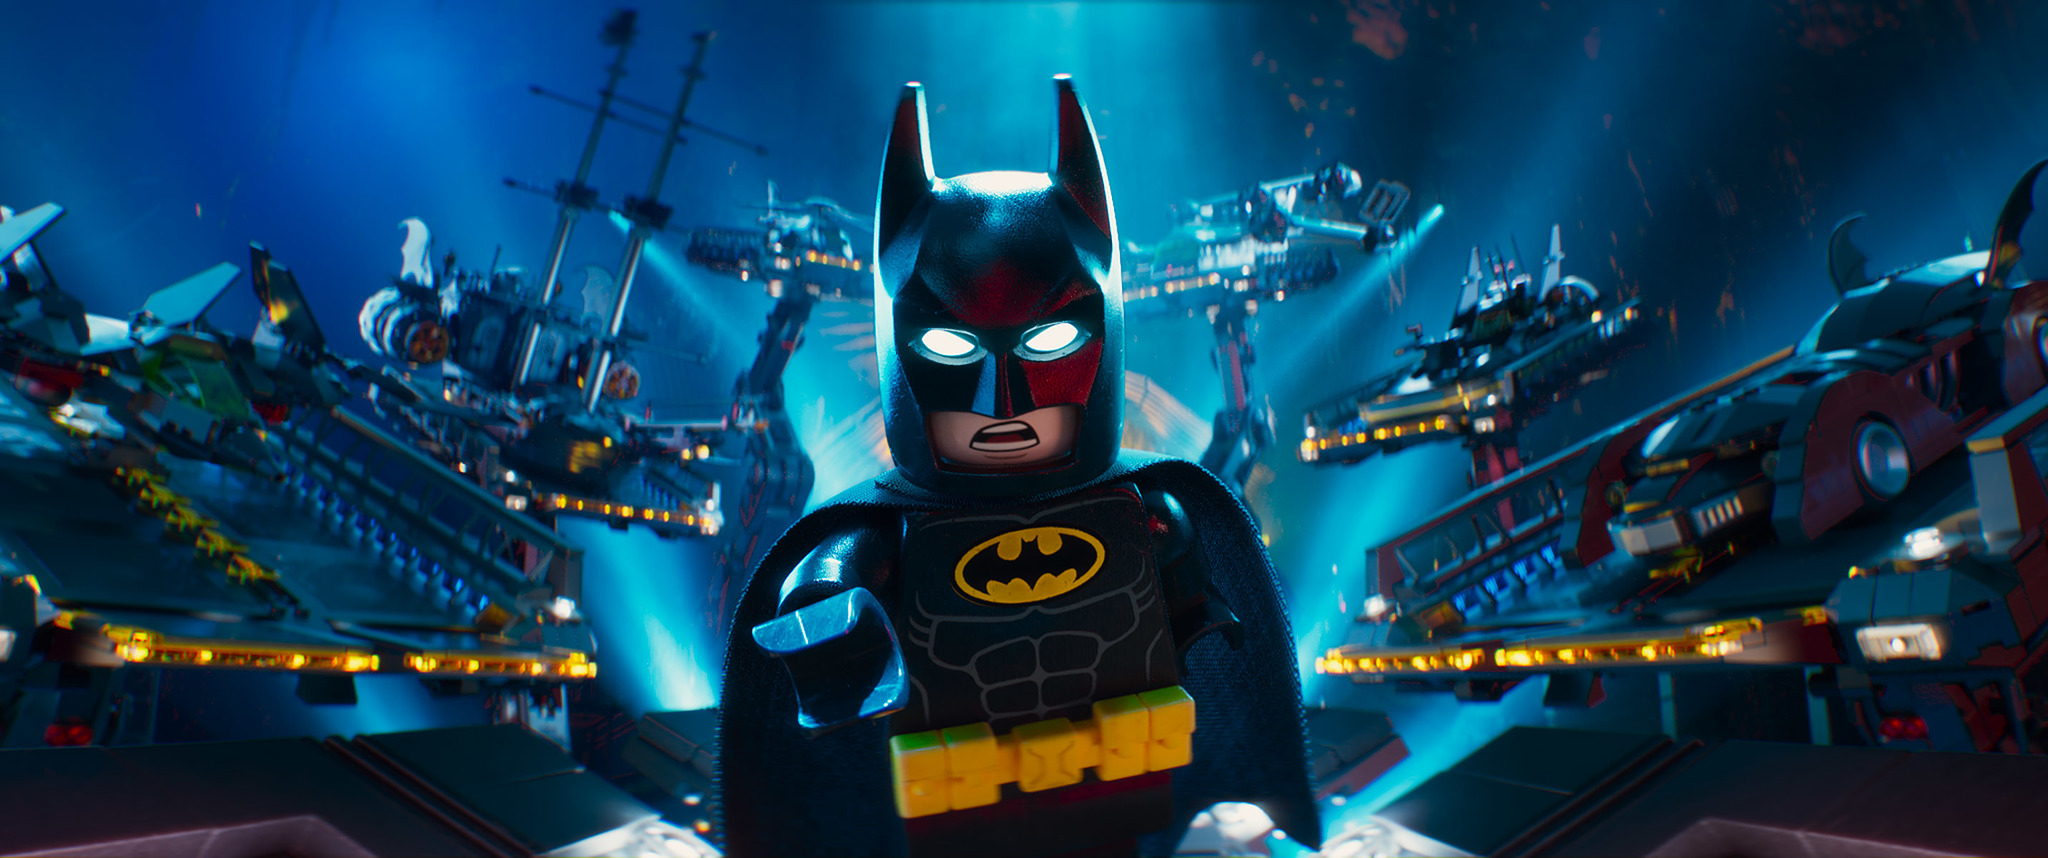 Scrapped 'LEGO Batman' Sequel Compared to 'The Godfather Part II